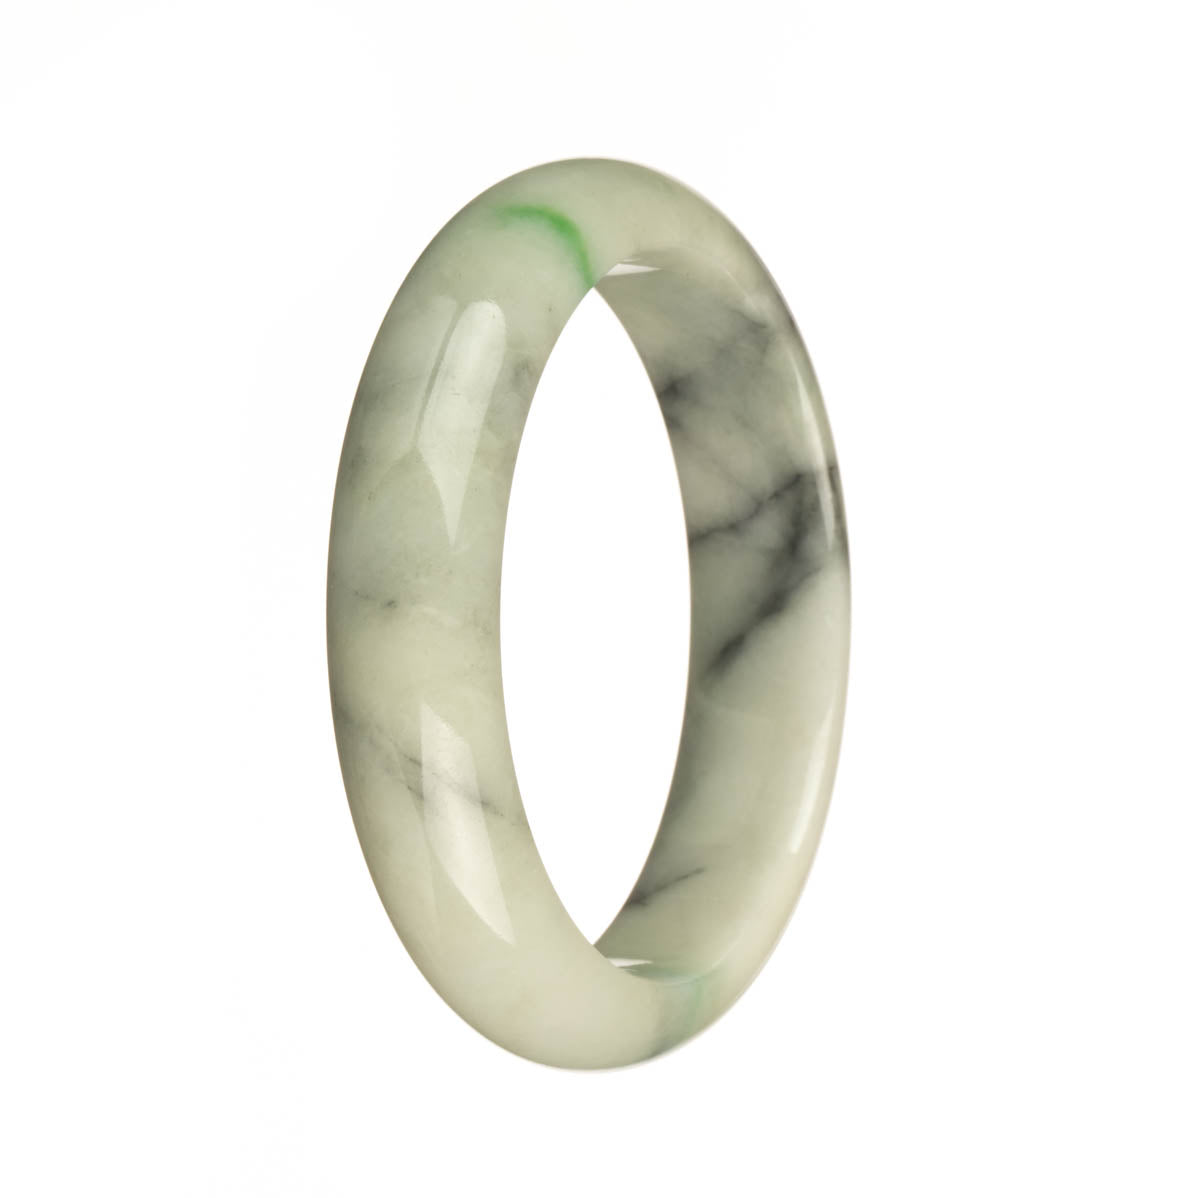 A close-up photo of a jadeite jade bracelet with a half moon shape, 57mm in size. The bracelet features authentic untreated white jade with intricate black and apple green patterns. From MAYS GEMS.